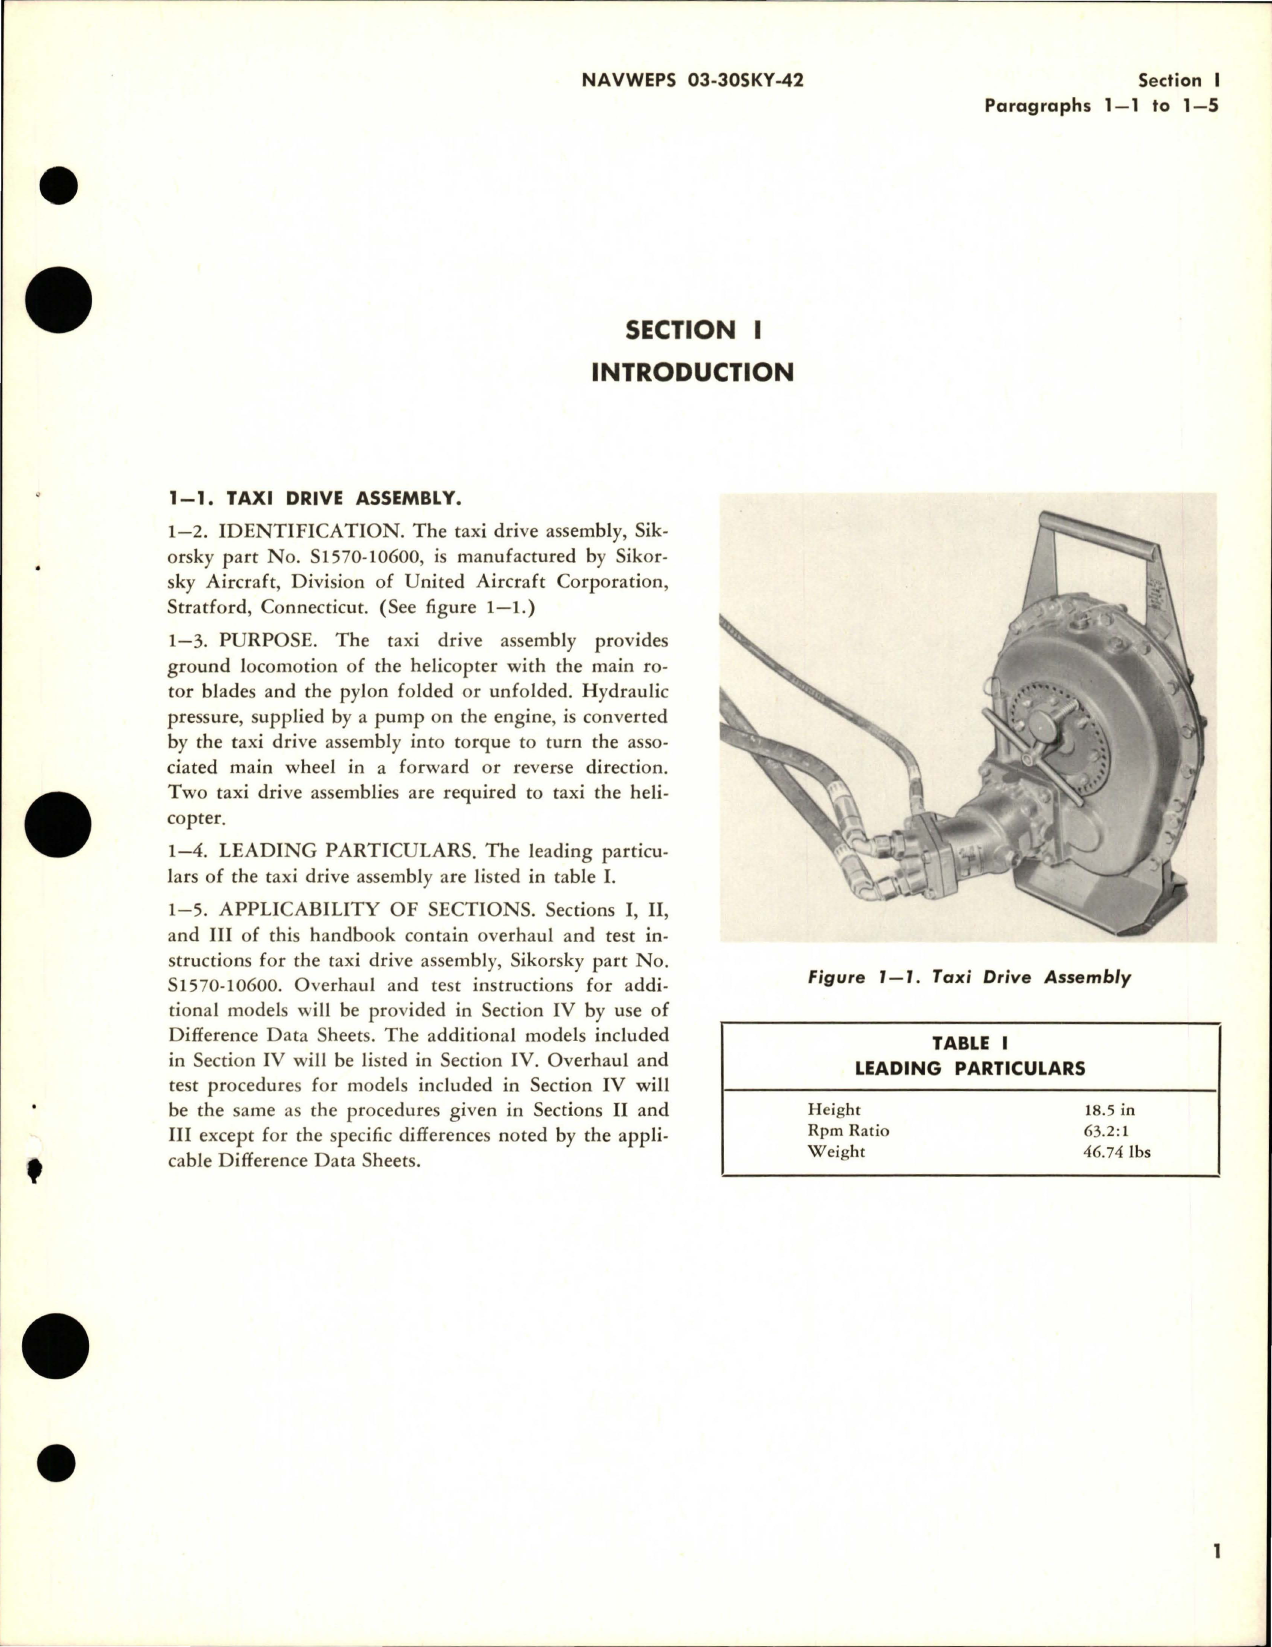 Sample page 5 from AirCorps Library document: Overhaul Instructions for Taxi Drive Assembly - Part S1570-10600